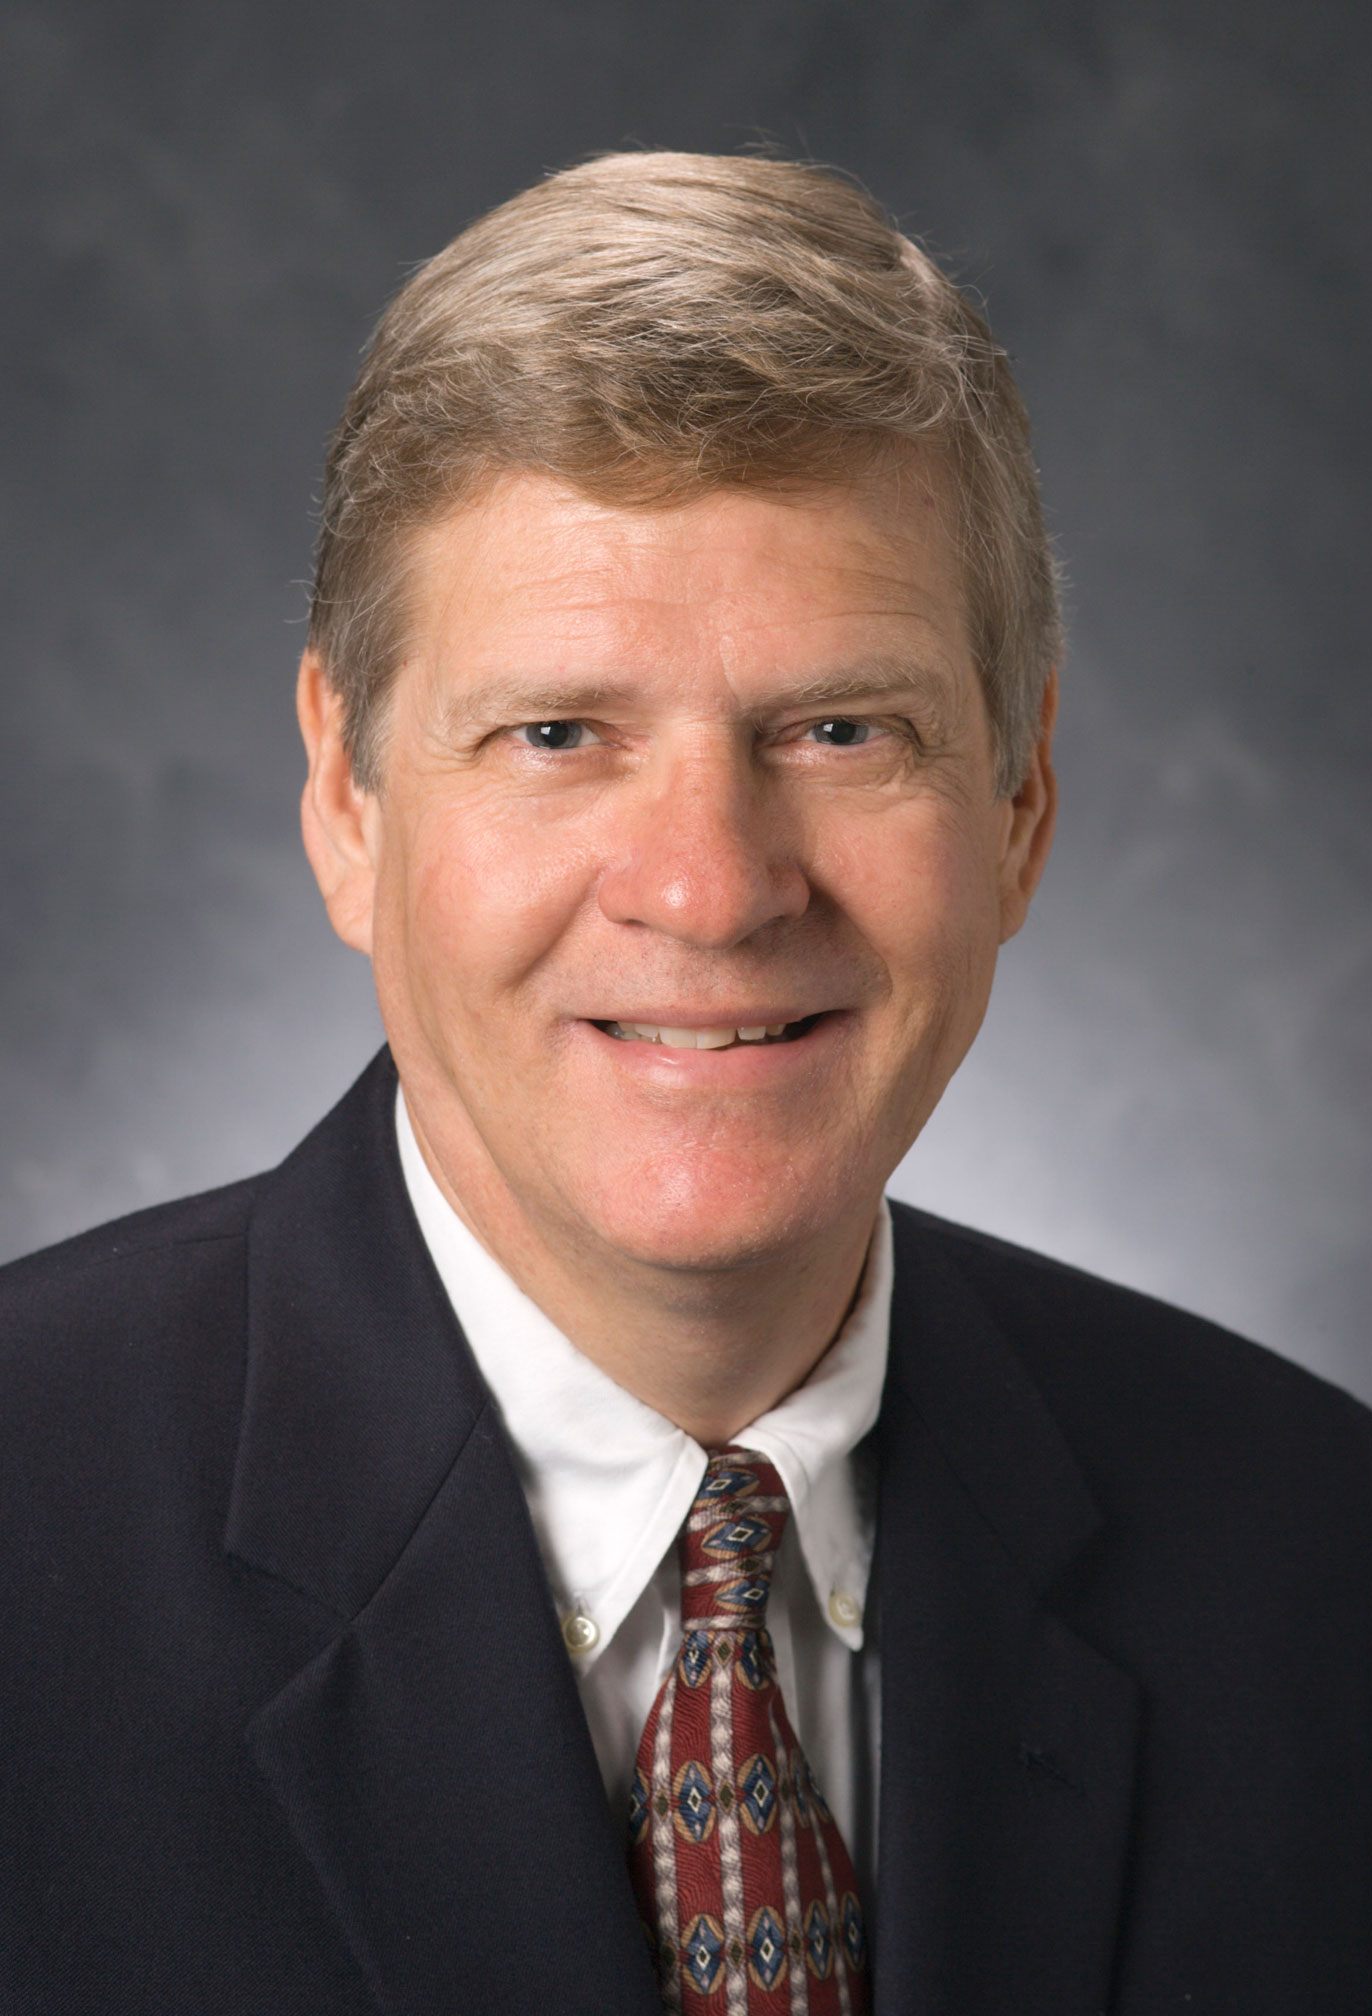 UGA Public Health Dean invited to Governor’s Advisory Council on Childhood Obesity